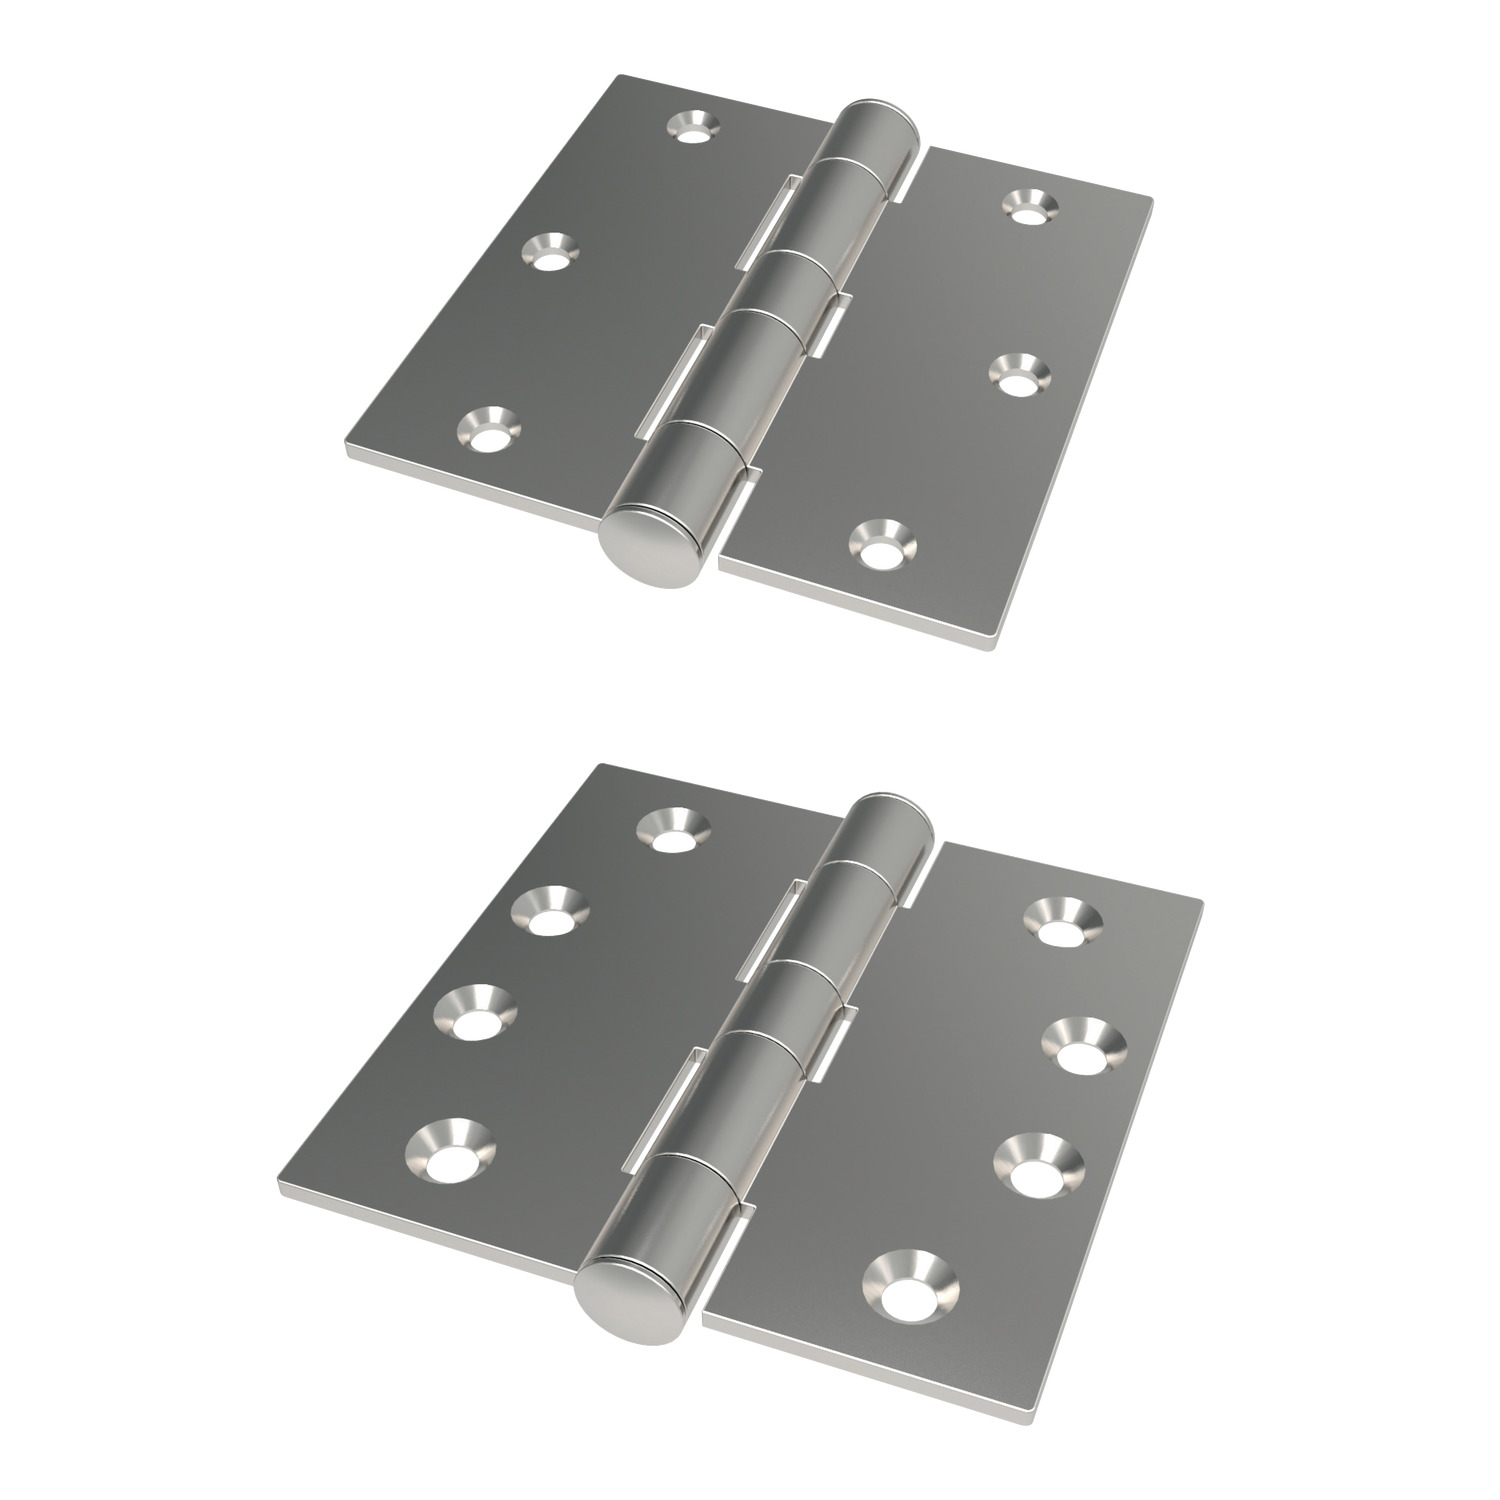 S0740.AC0009 Surface Mount - Leaf Hinges Screw mount - Stainless steel. 89 x 89. Also known as 52340.W0009